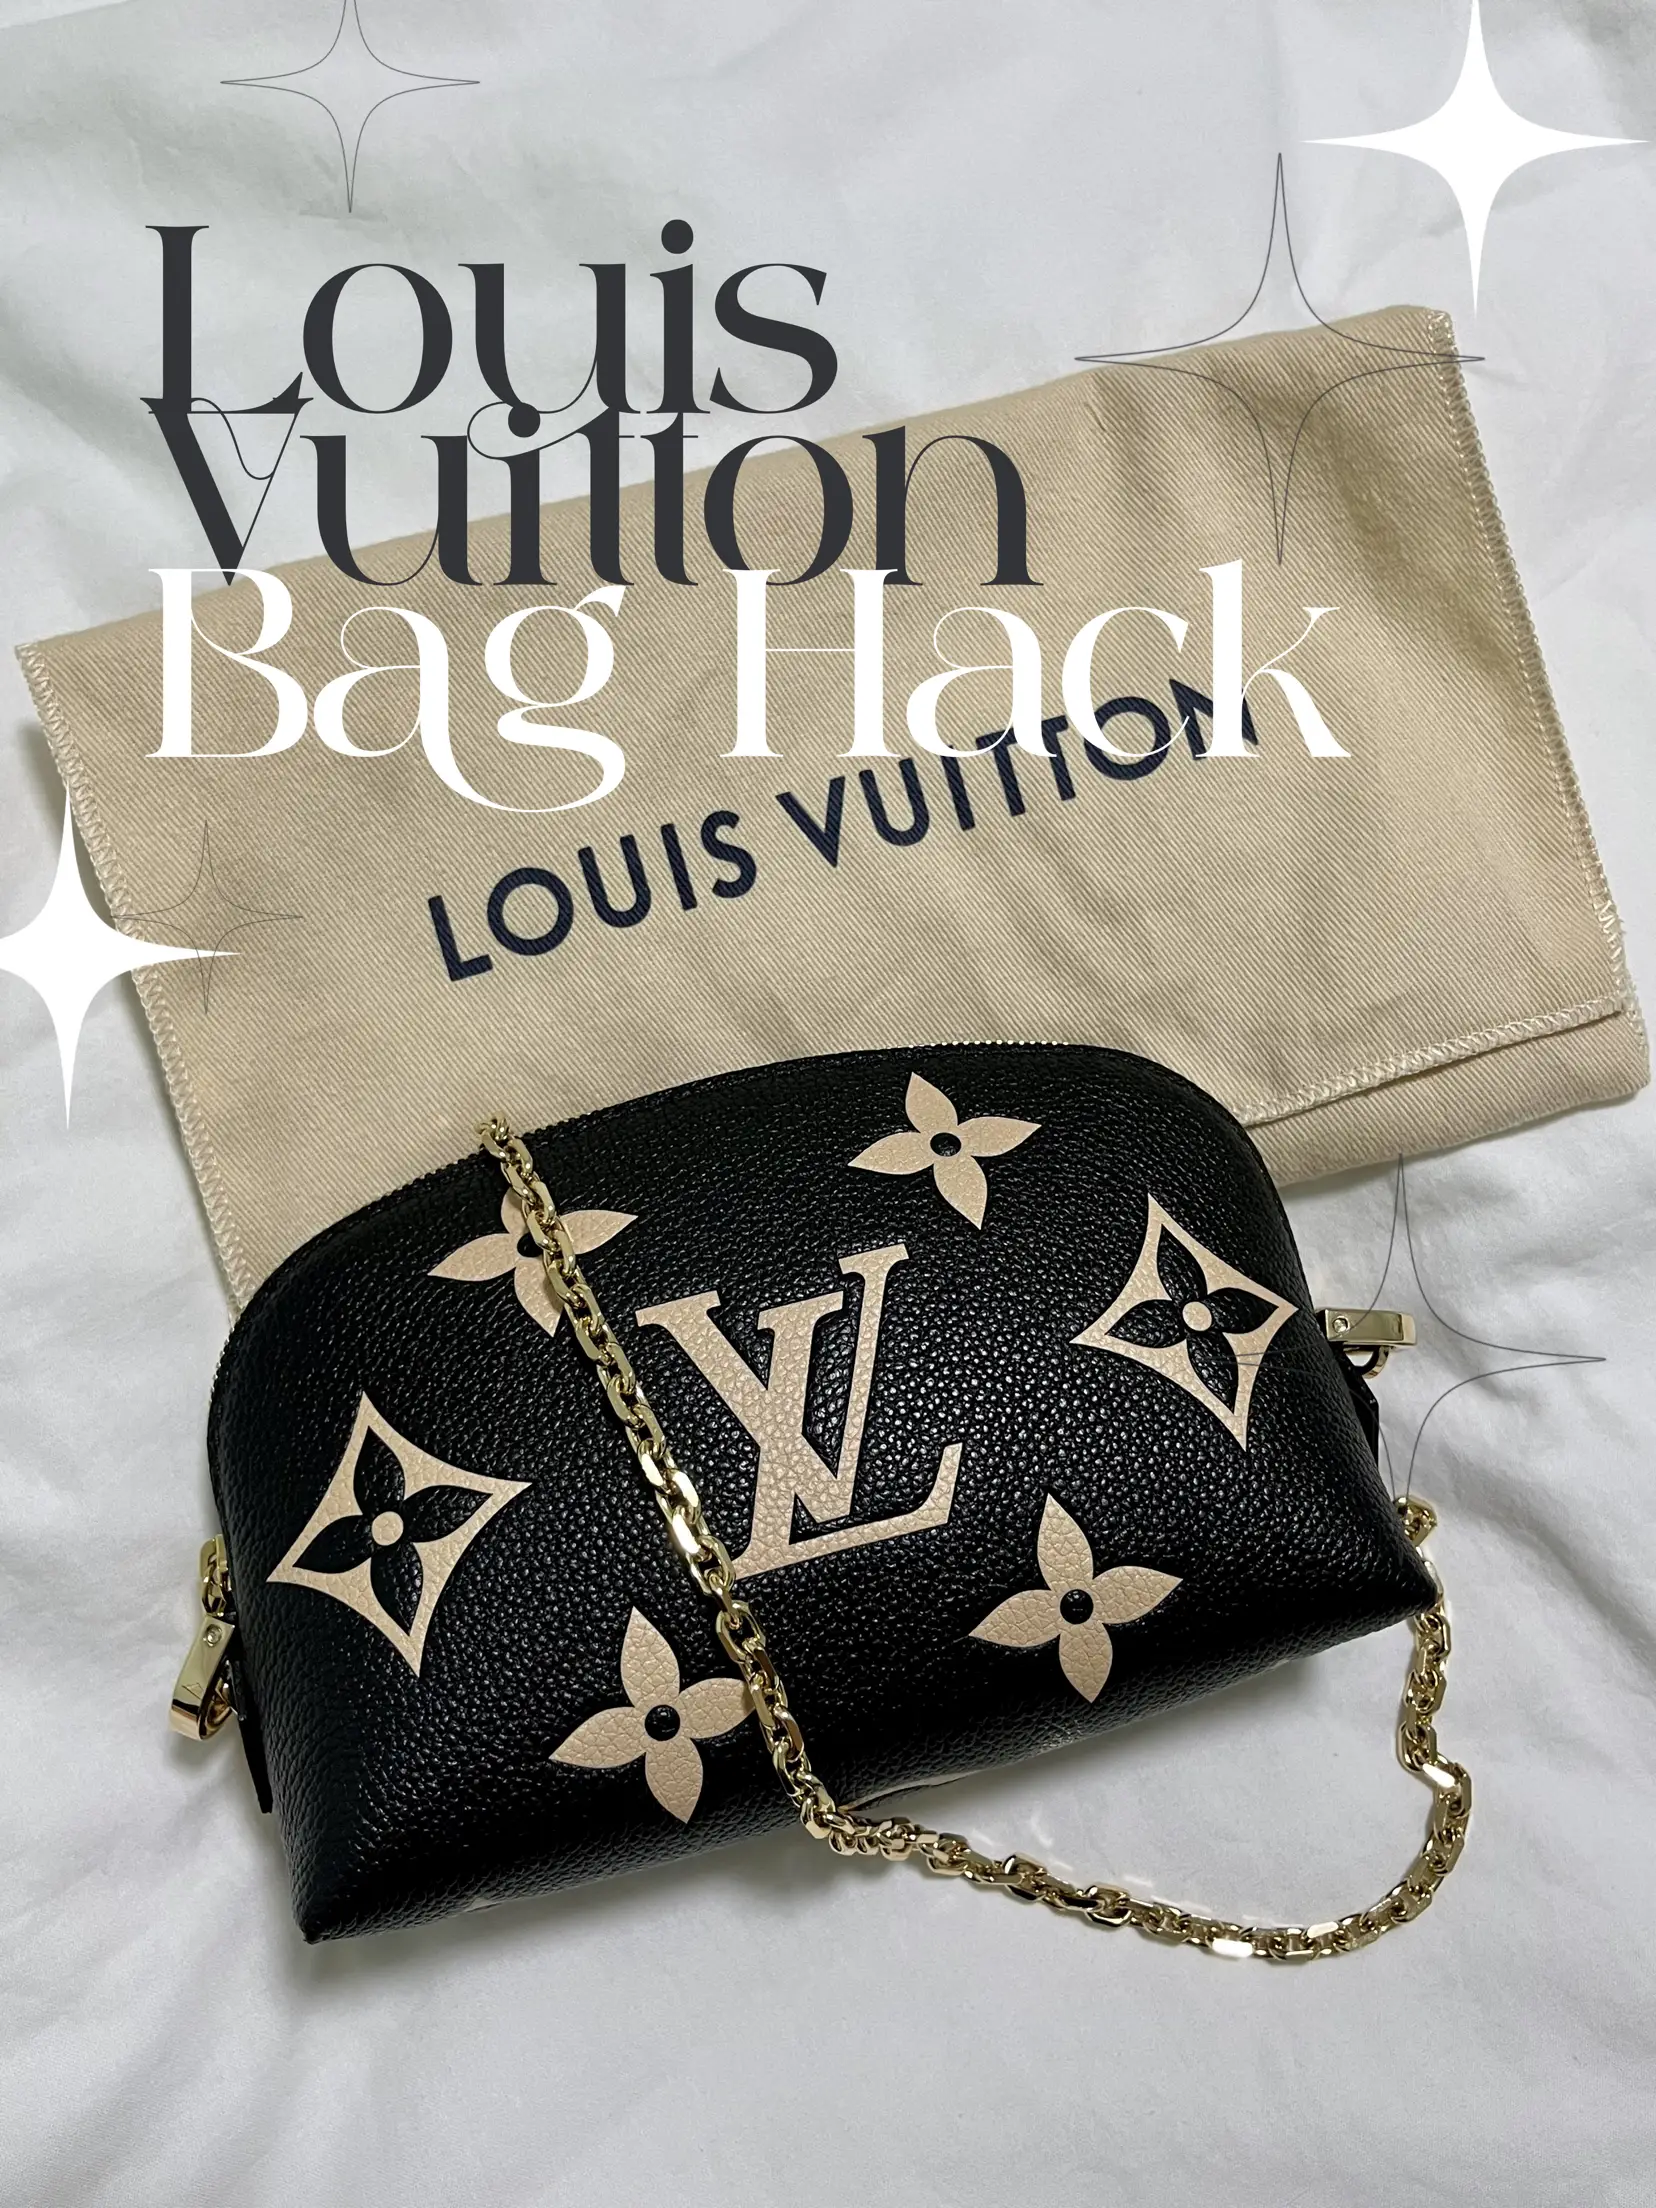 Louis Vuitton hack. If you are considering buying a Louis Vuitton agen